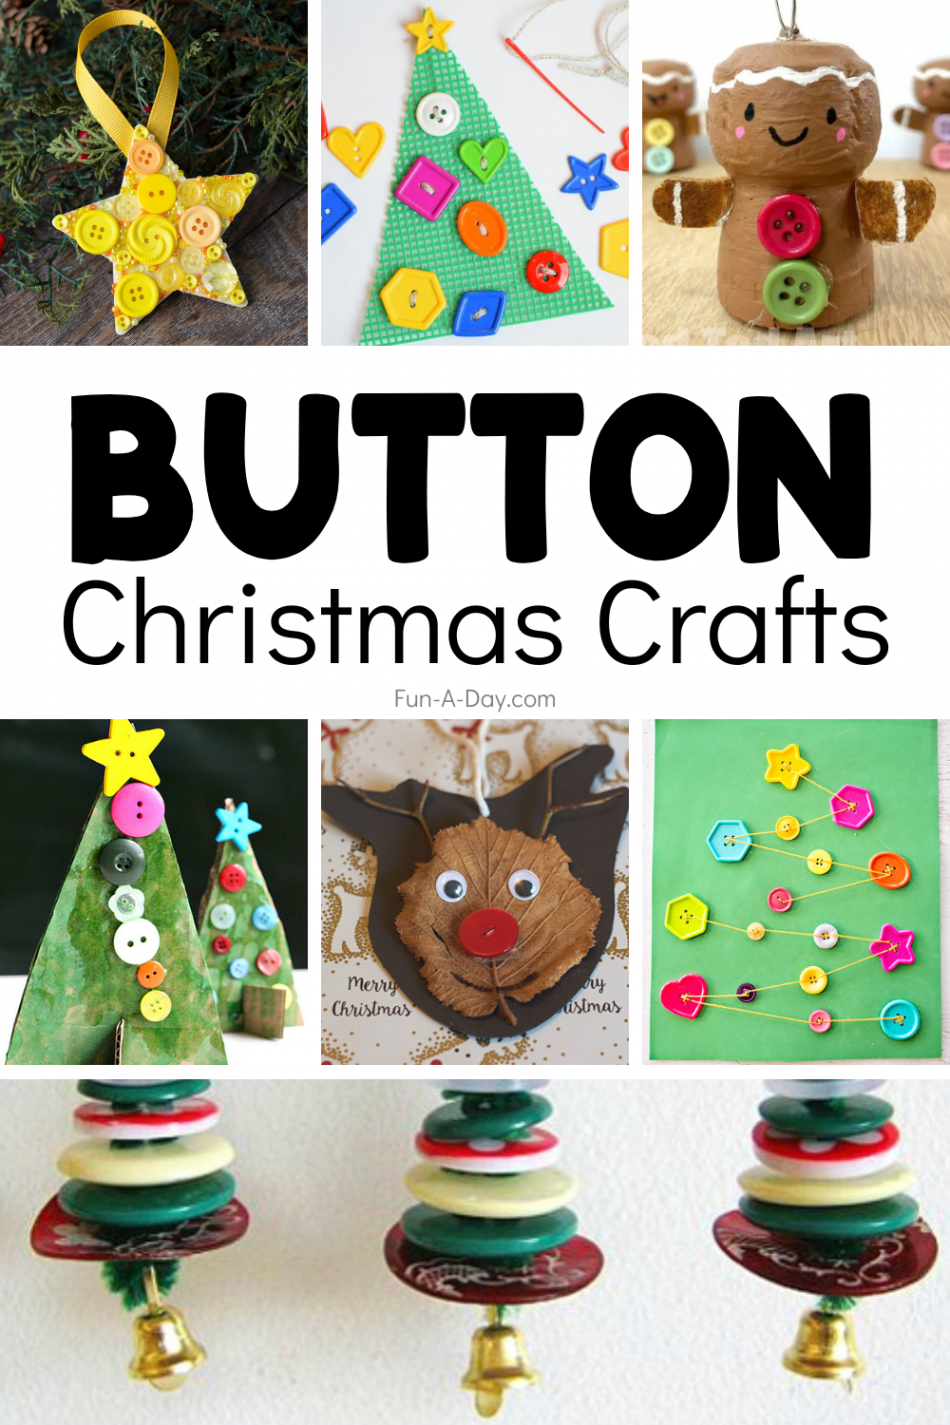 Button Christmas Crafts for Kids to Make - Fun-A-Day!